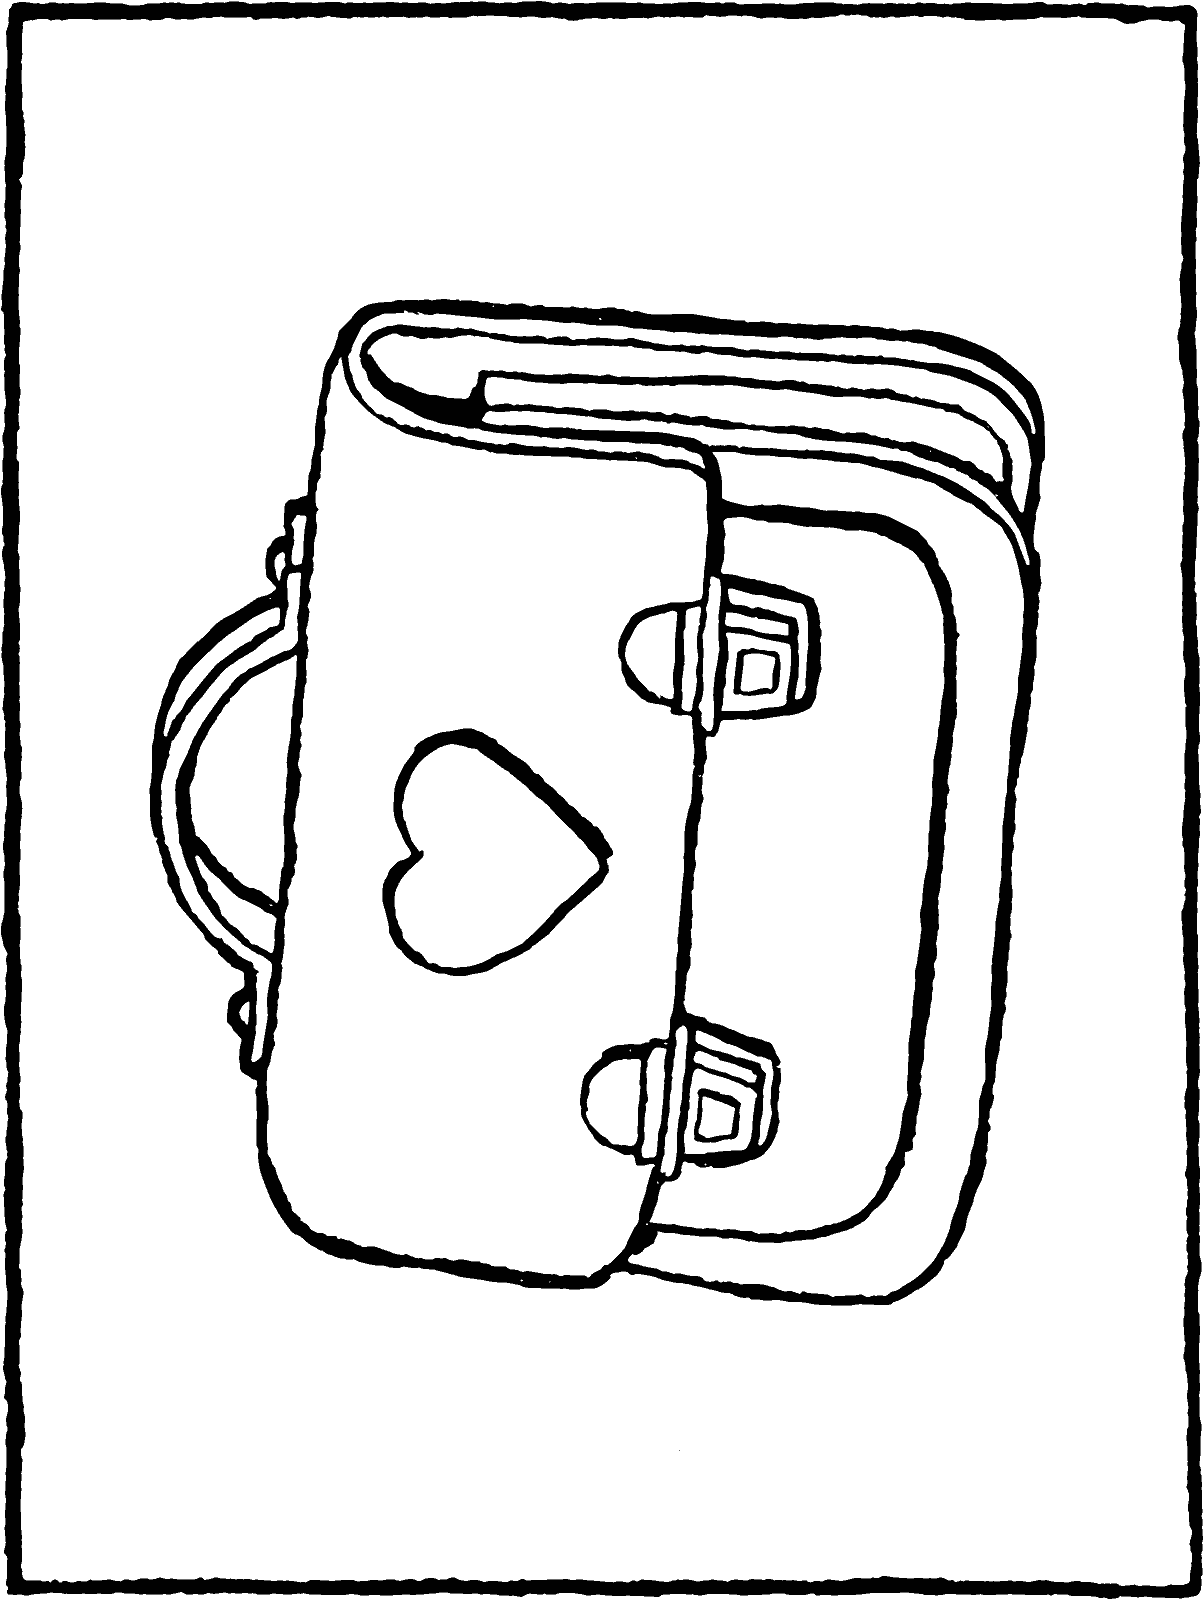 Make Coloring For Bag Free For Kids Coloring Page